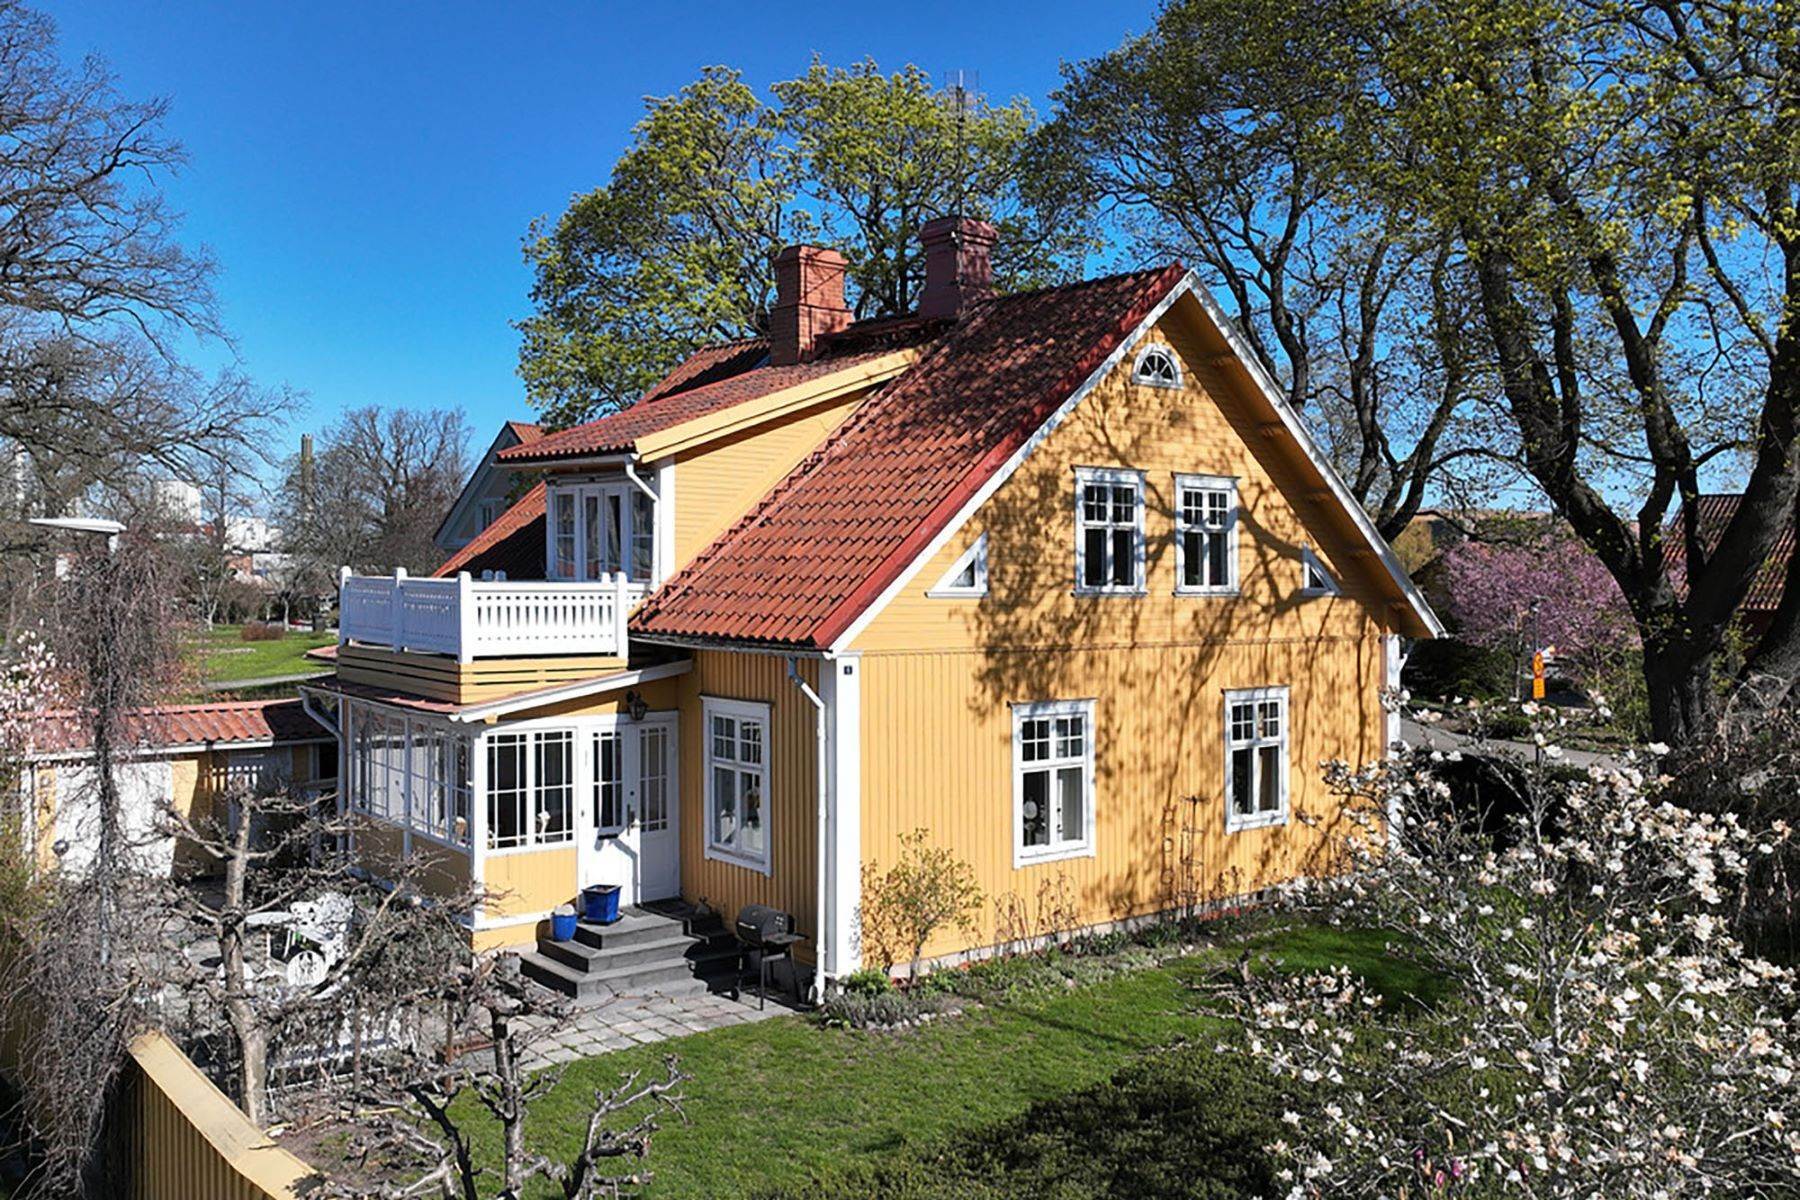 Single Family Homes for Sale at Tullgatan 6 Other Sweden, Other Areas In Sweden 63217 Sweden